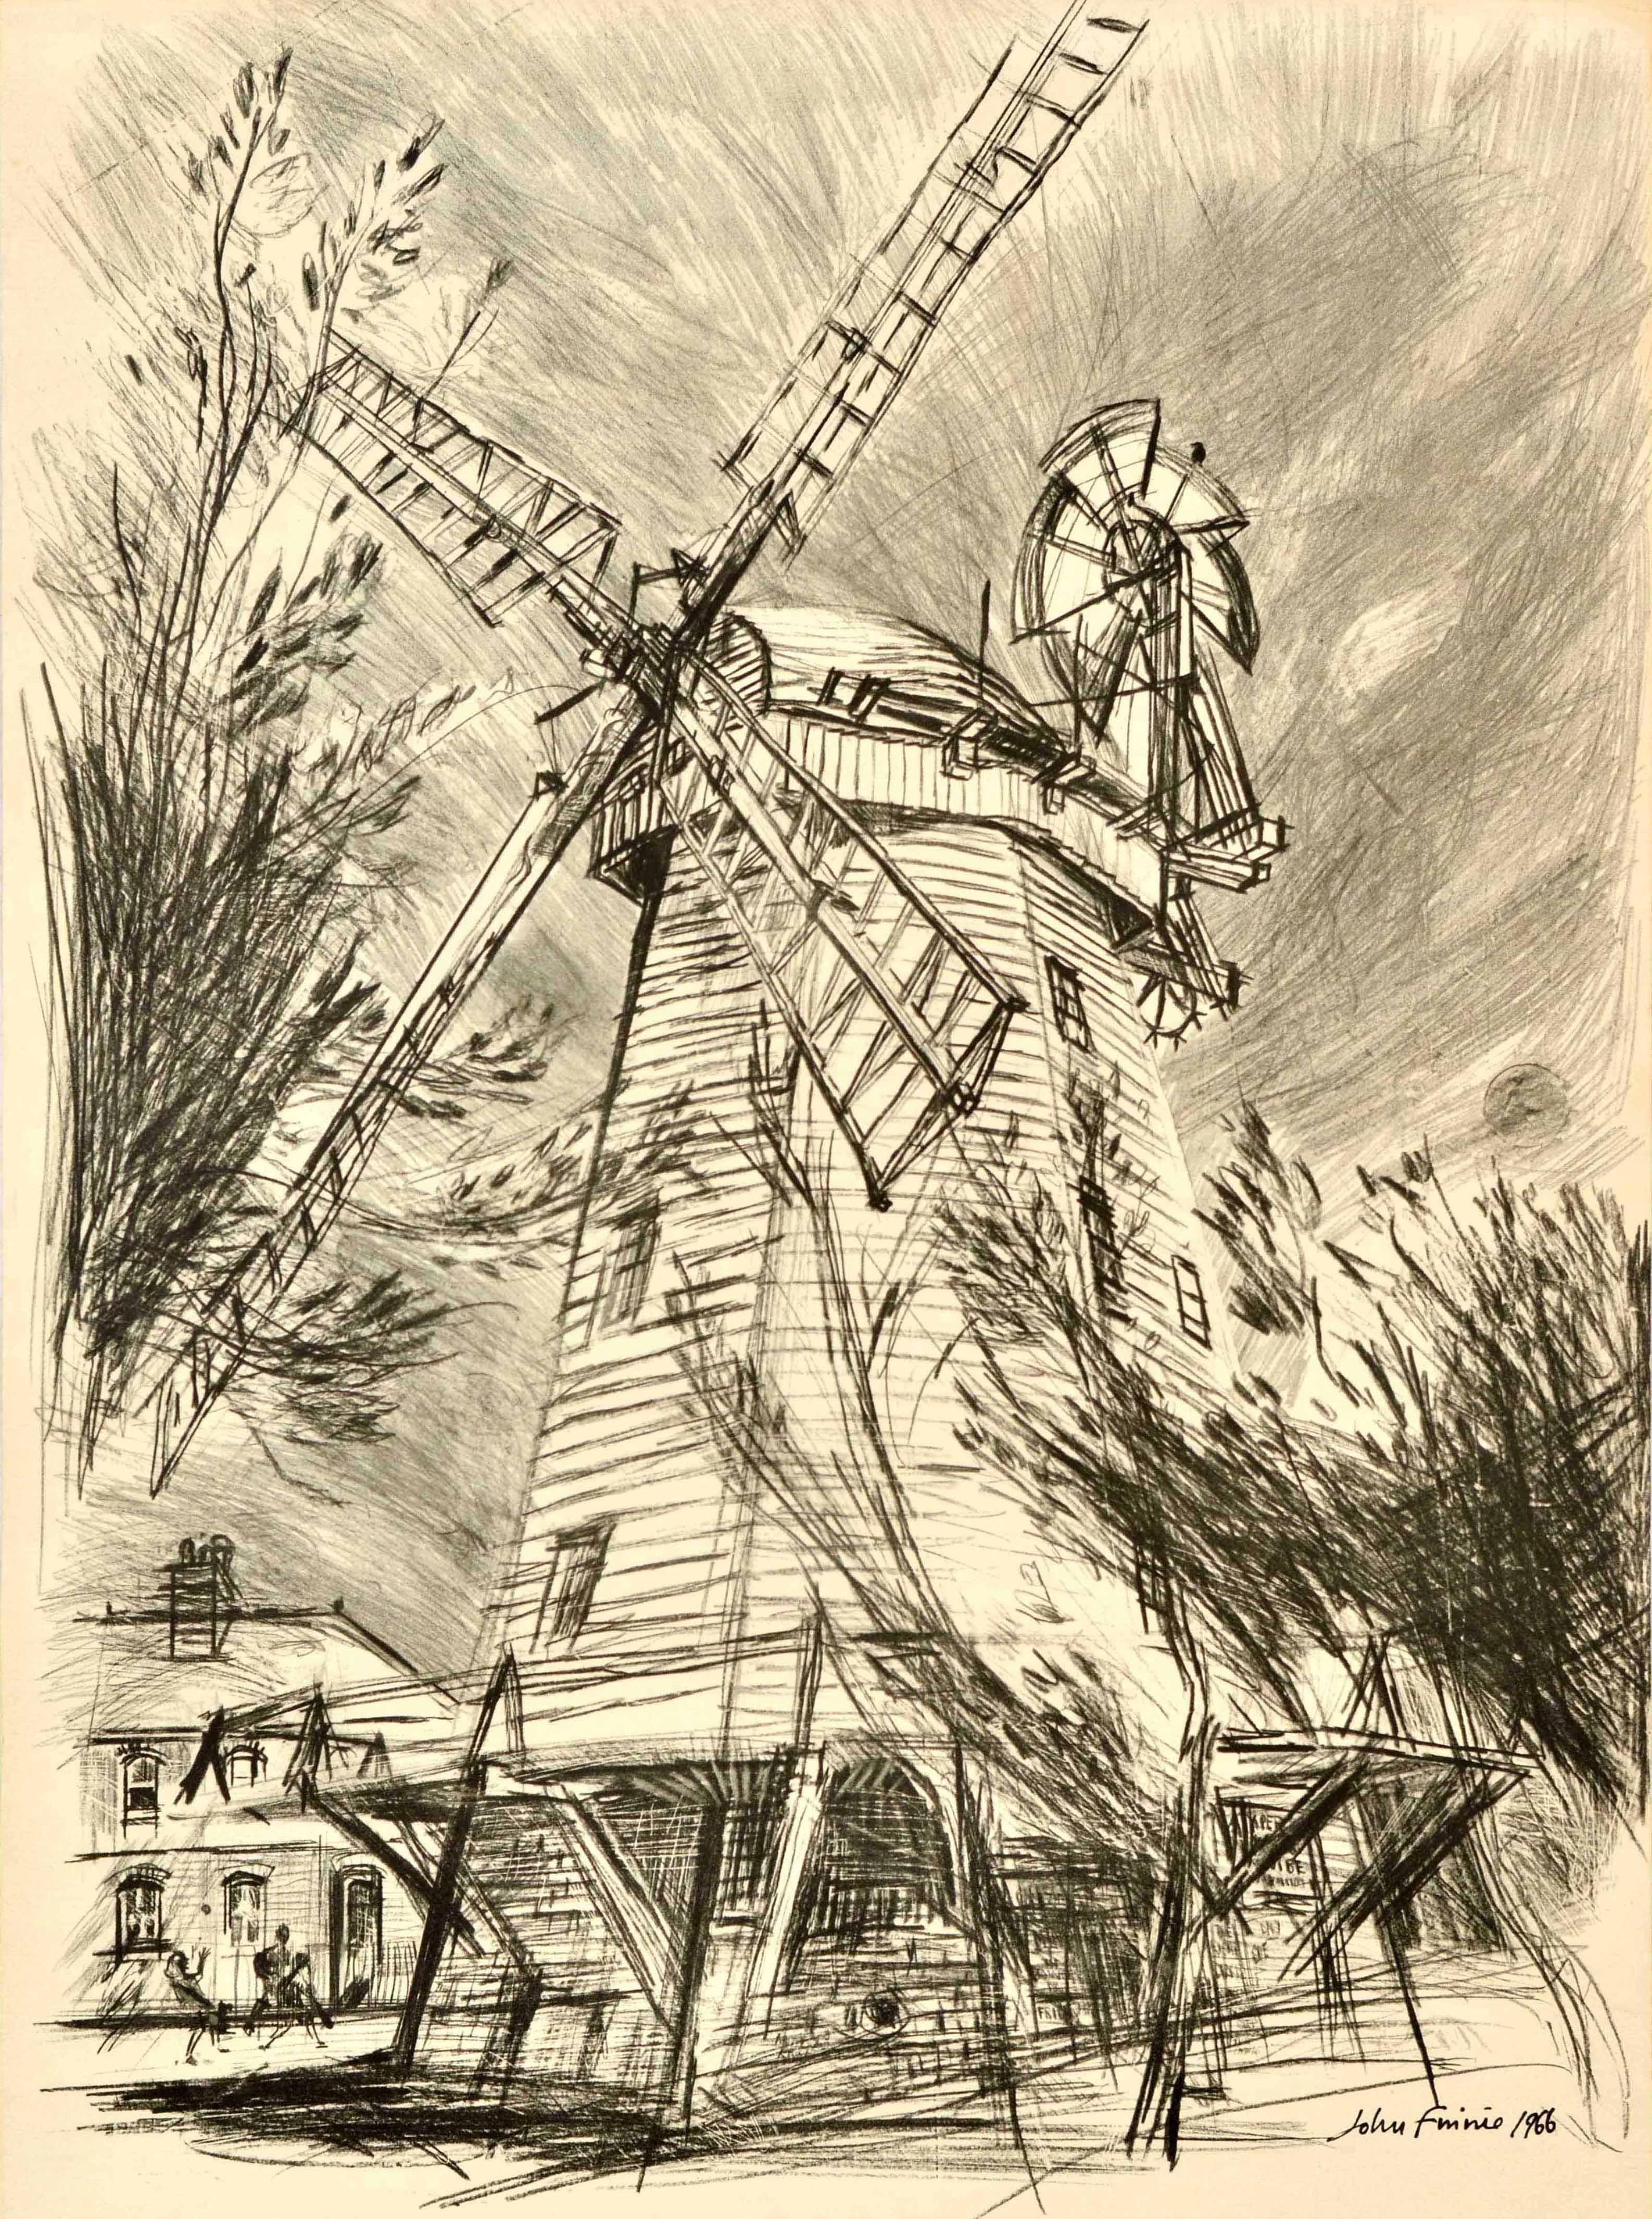 Original vintage London Transport poster featuring a great black and white drawing by John Finnie (b.1935) depicting people walking next to a windmill with trees in the foreground, the text and London Underground roundel in red below - Windmills